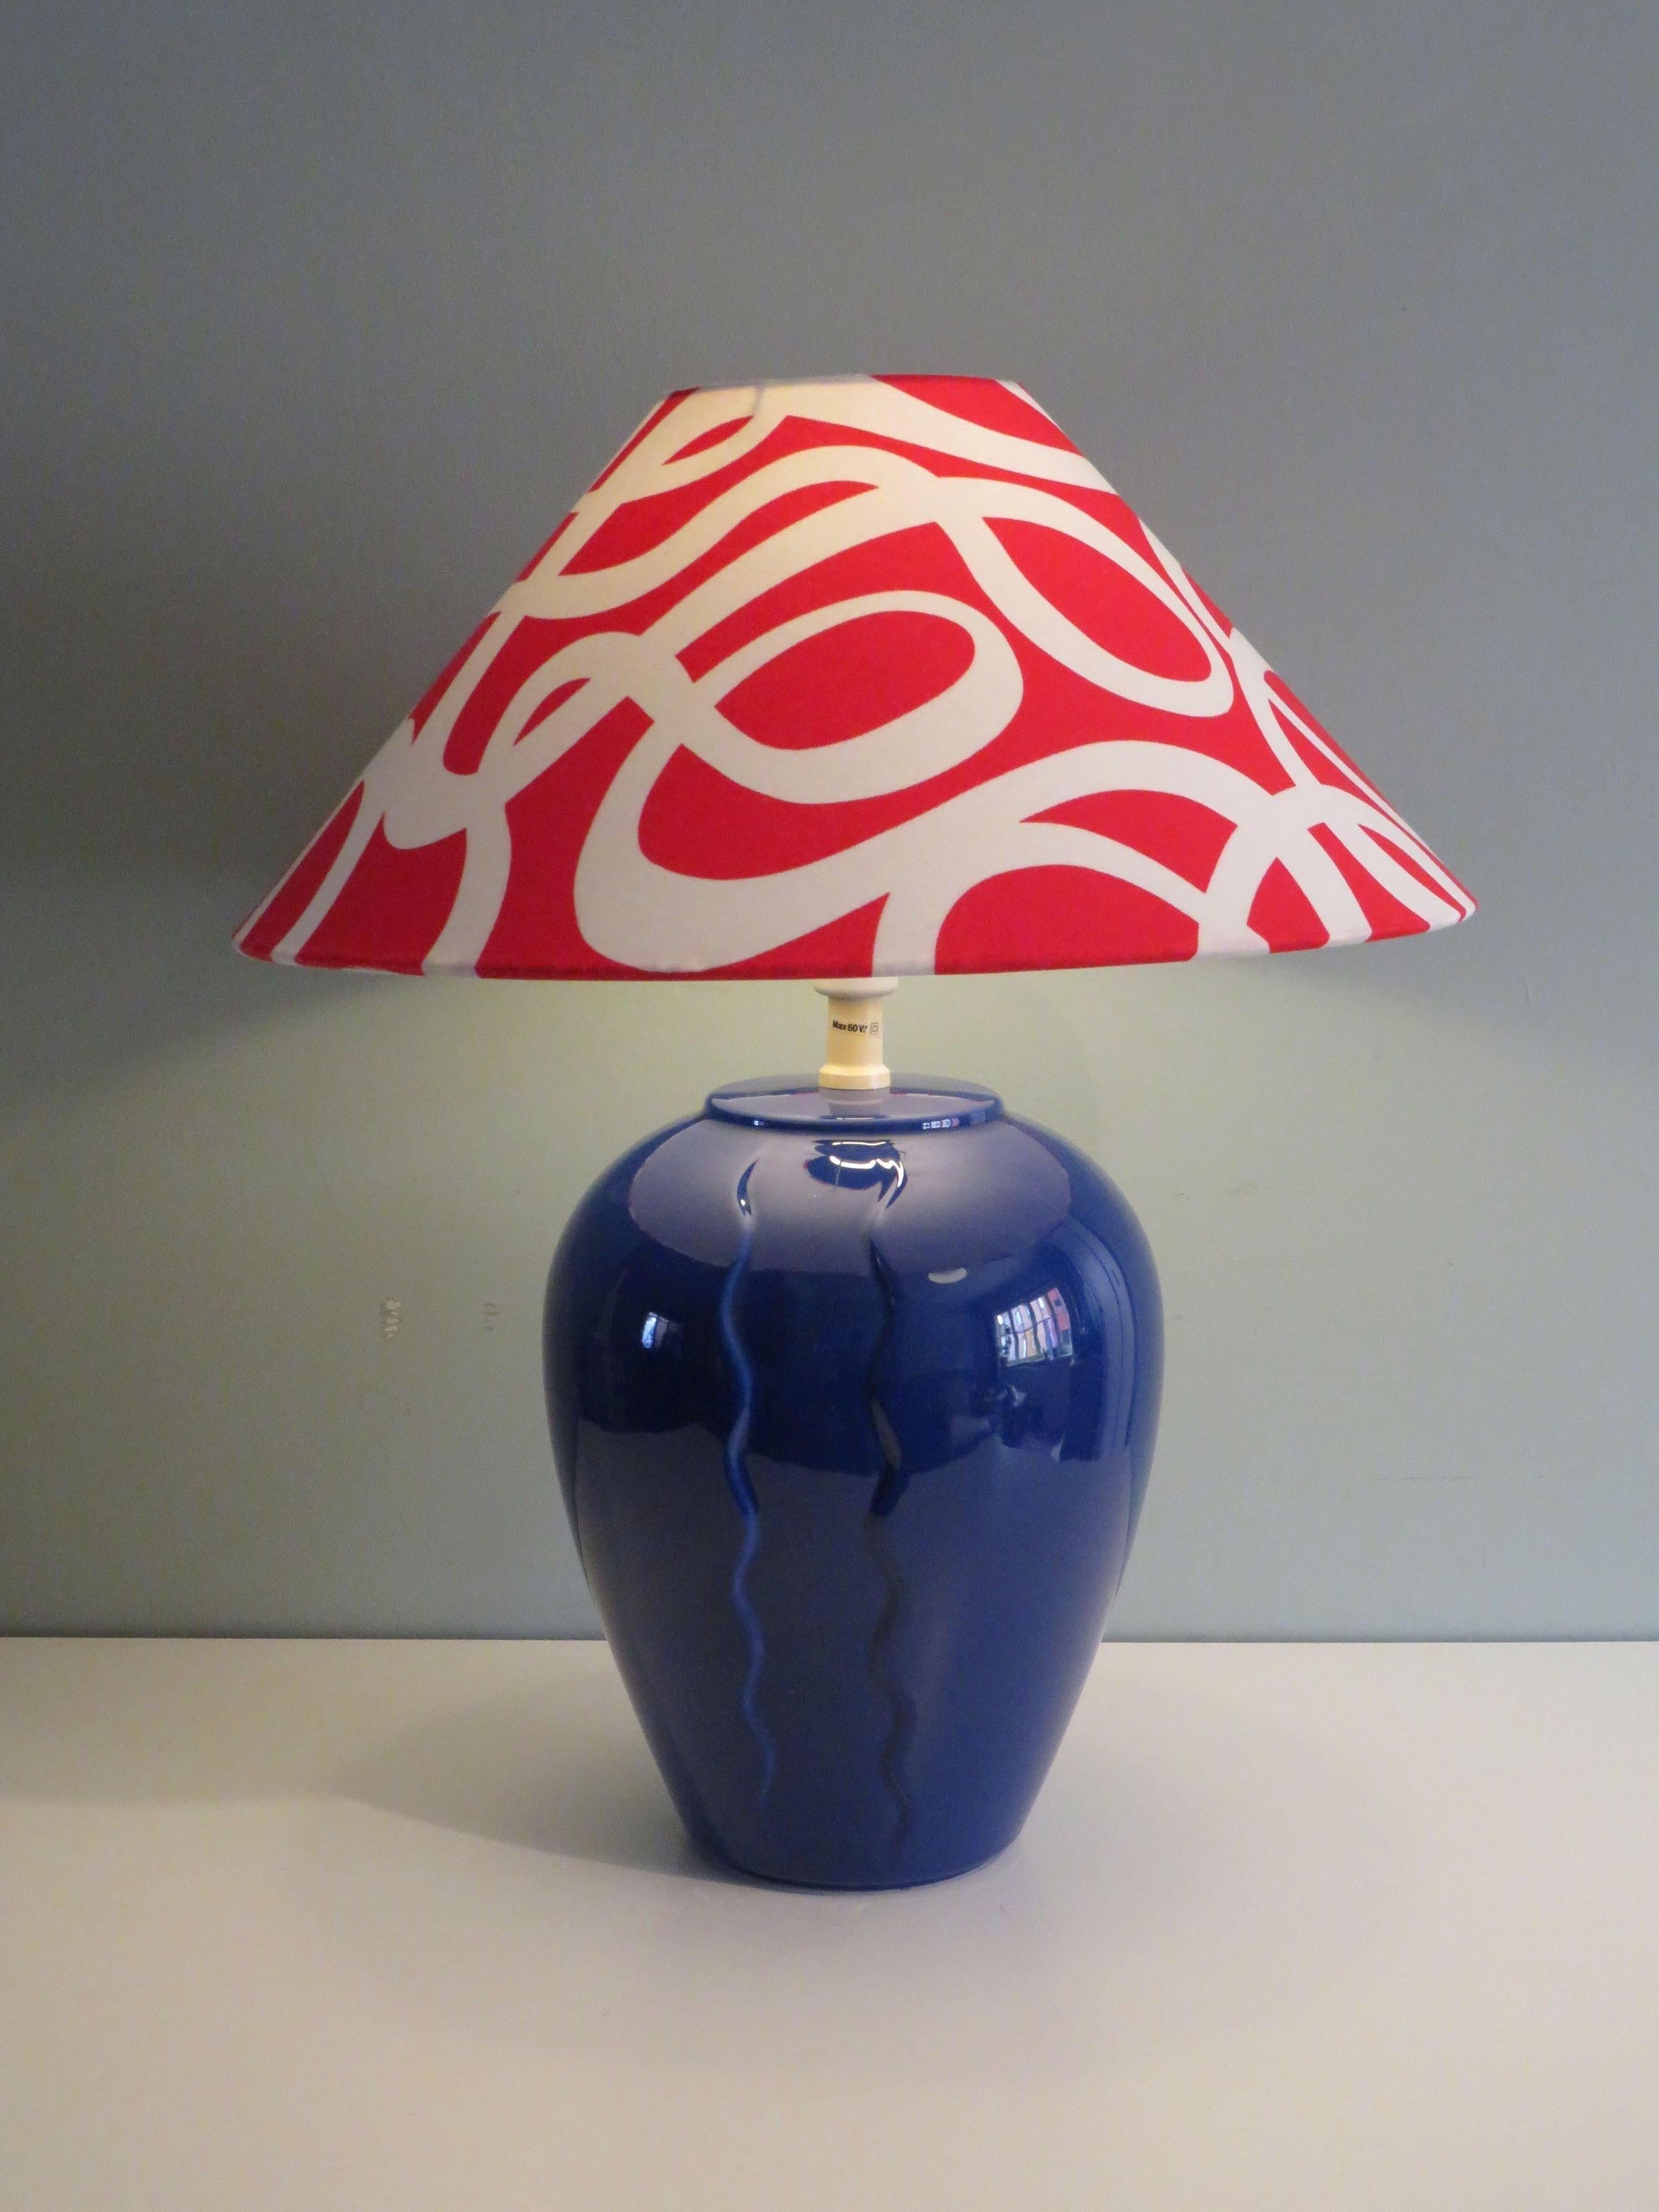 Blue ceramic table lamp in Memphis style by Ikea, 1980s. Label is located at the bottom of the ceramic table base.
The intense blue ceramic base has a custom-made lampshade in red-white fabric by Erika Pekkari for Ikea from 2006. The table lamp has